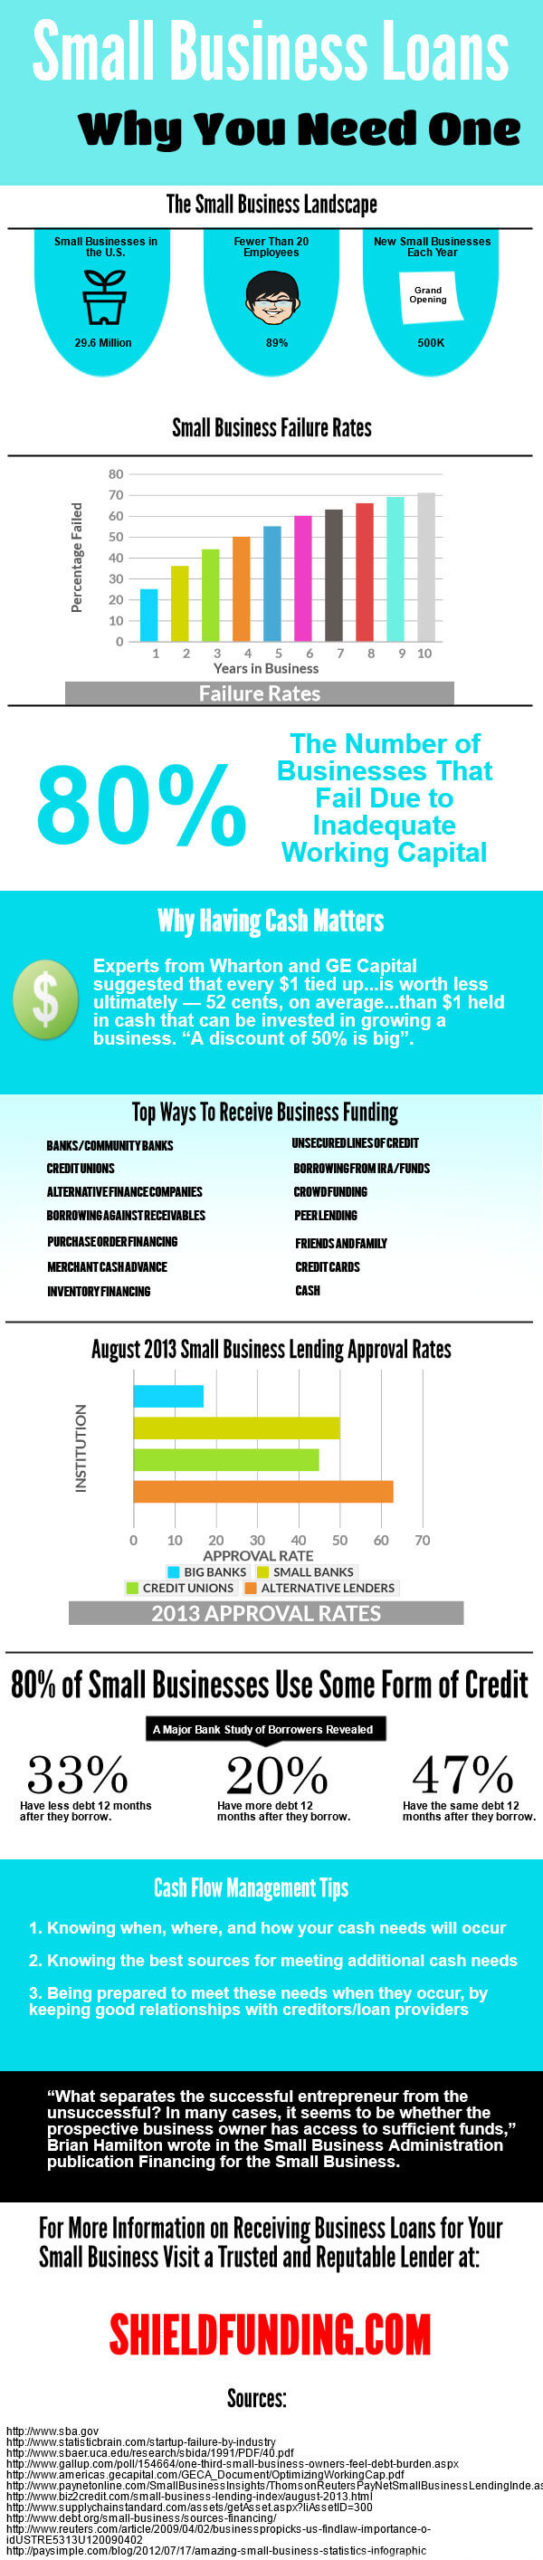 why-small-business-loans-matter